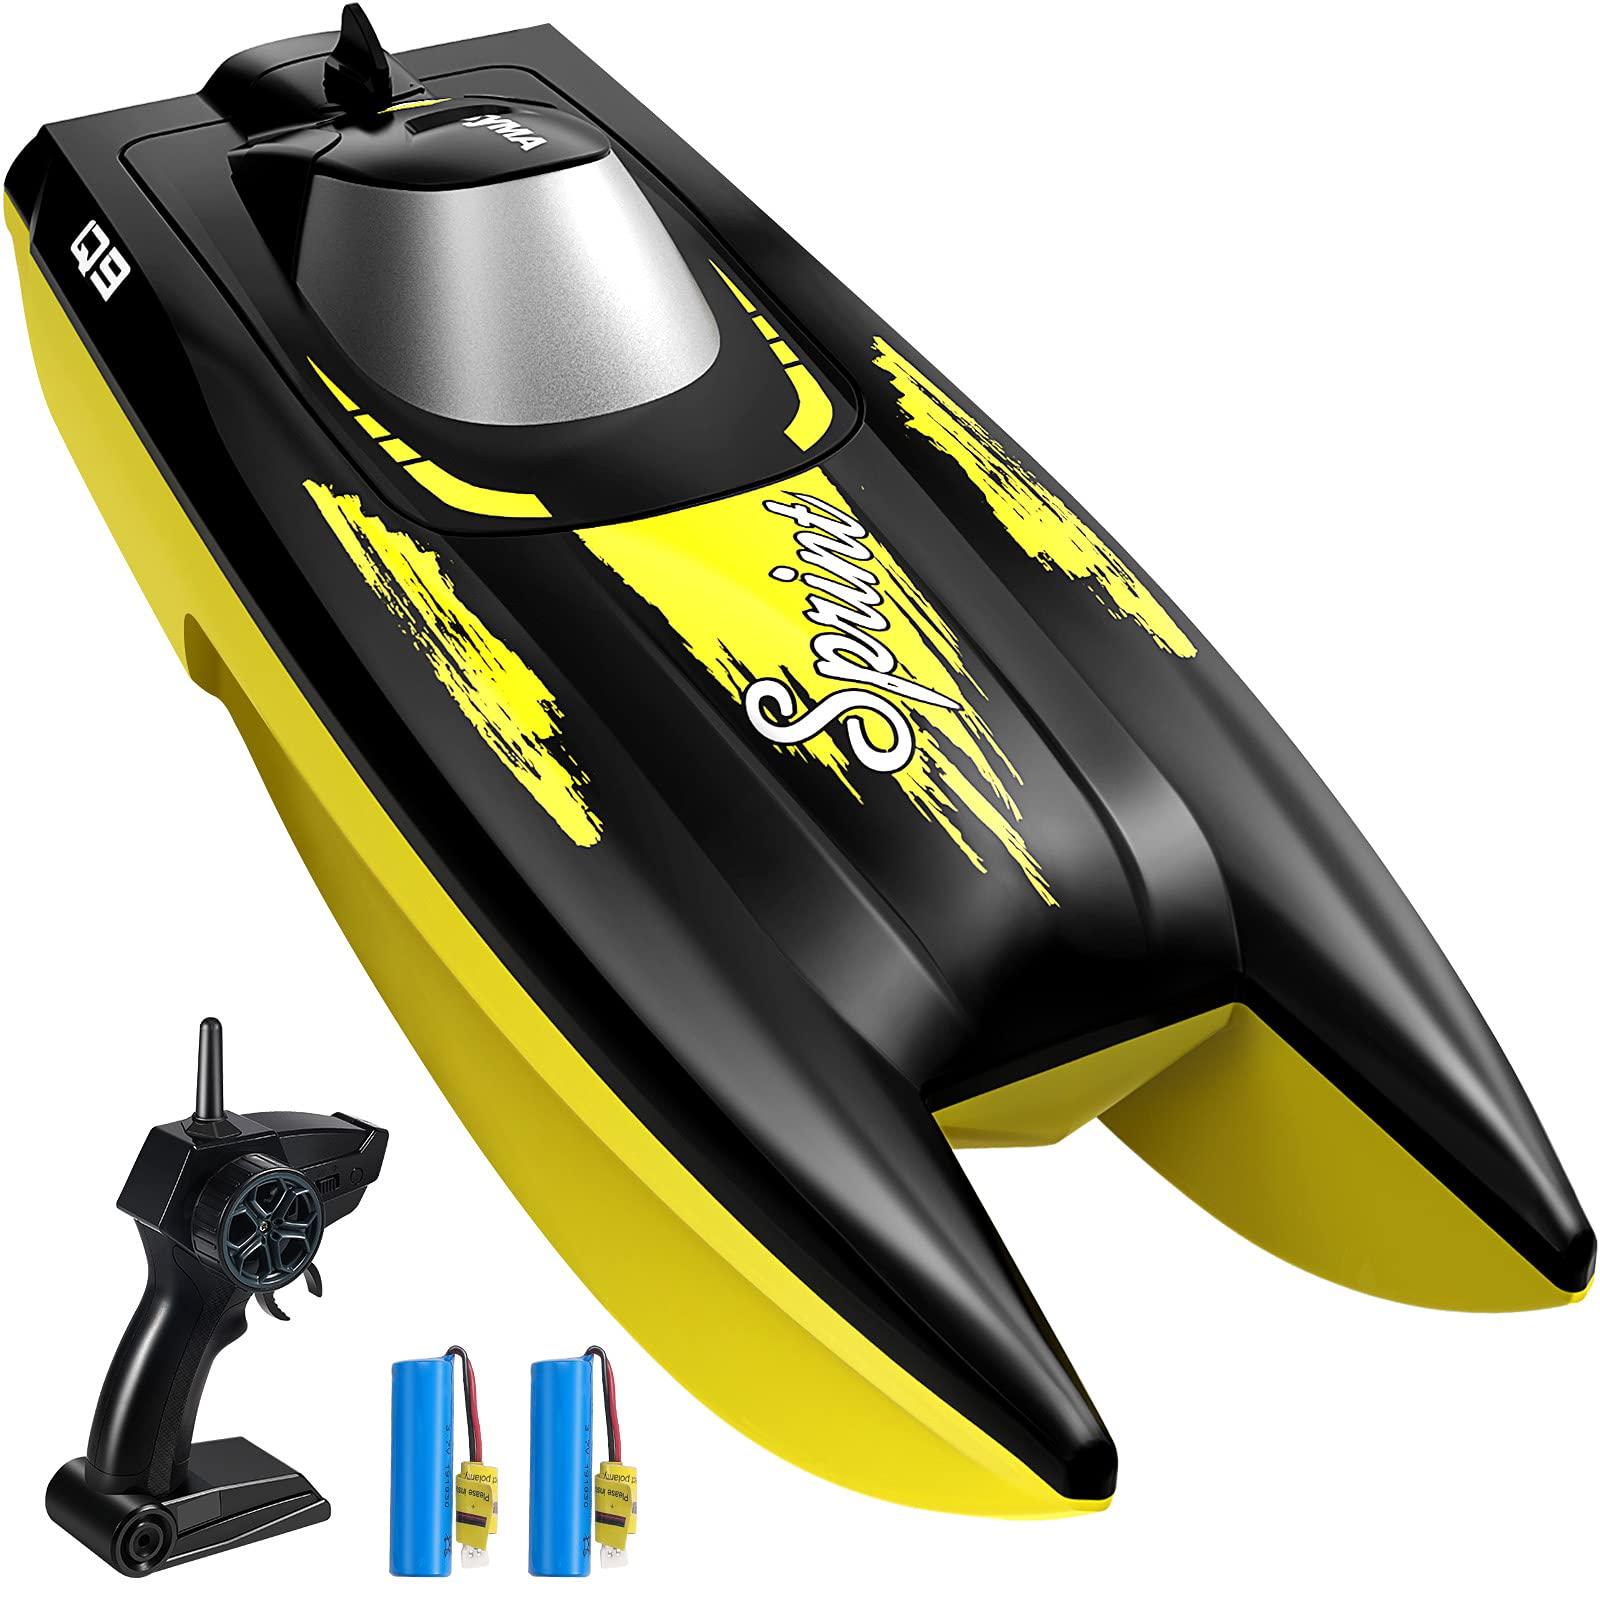 Rc Boats Amazon: Utilizing Reviews & Q&A on Amazon for Informed RC Boat Purchases